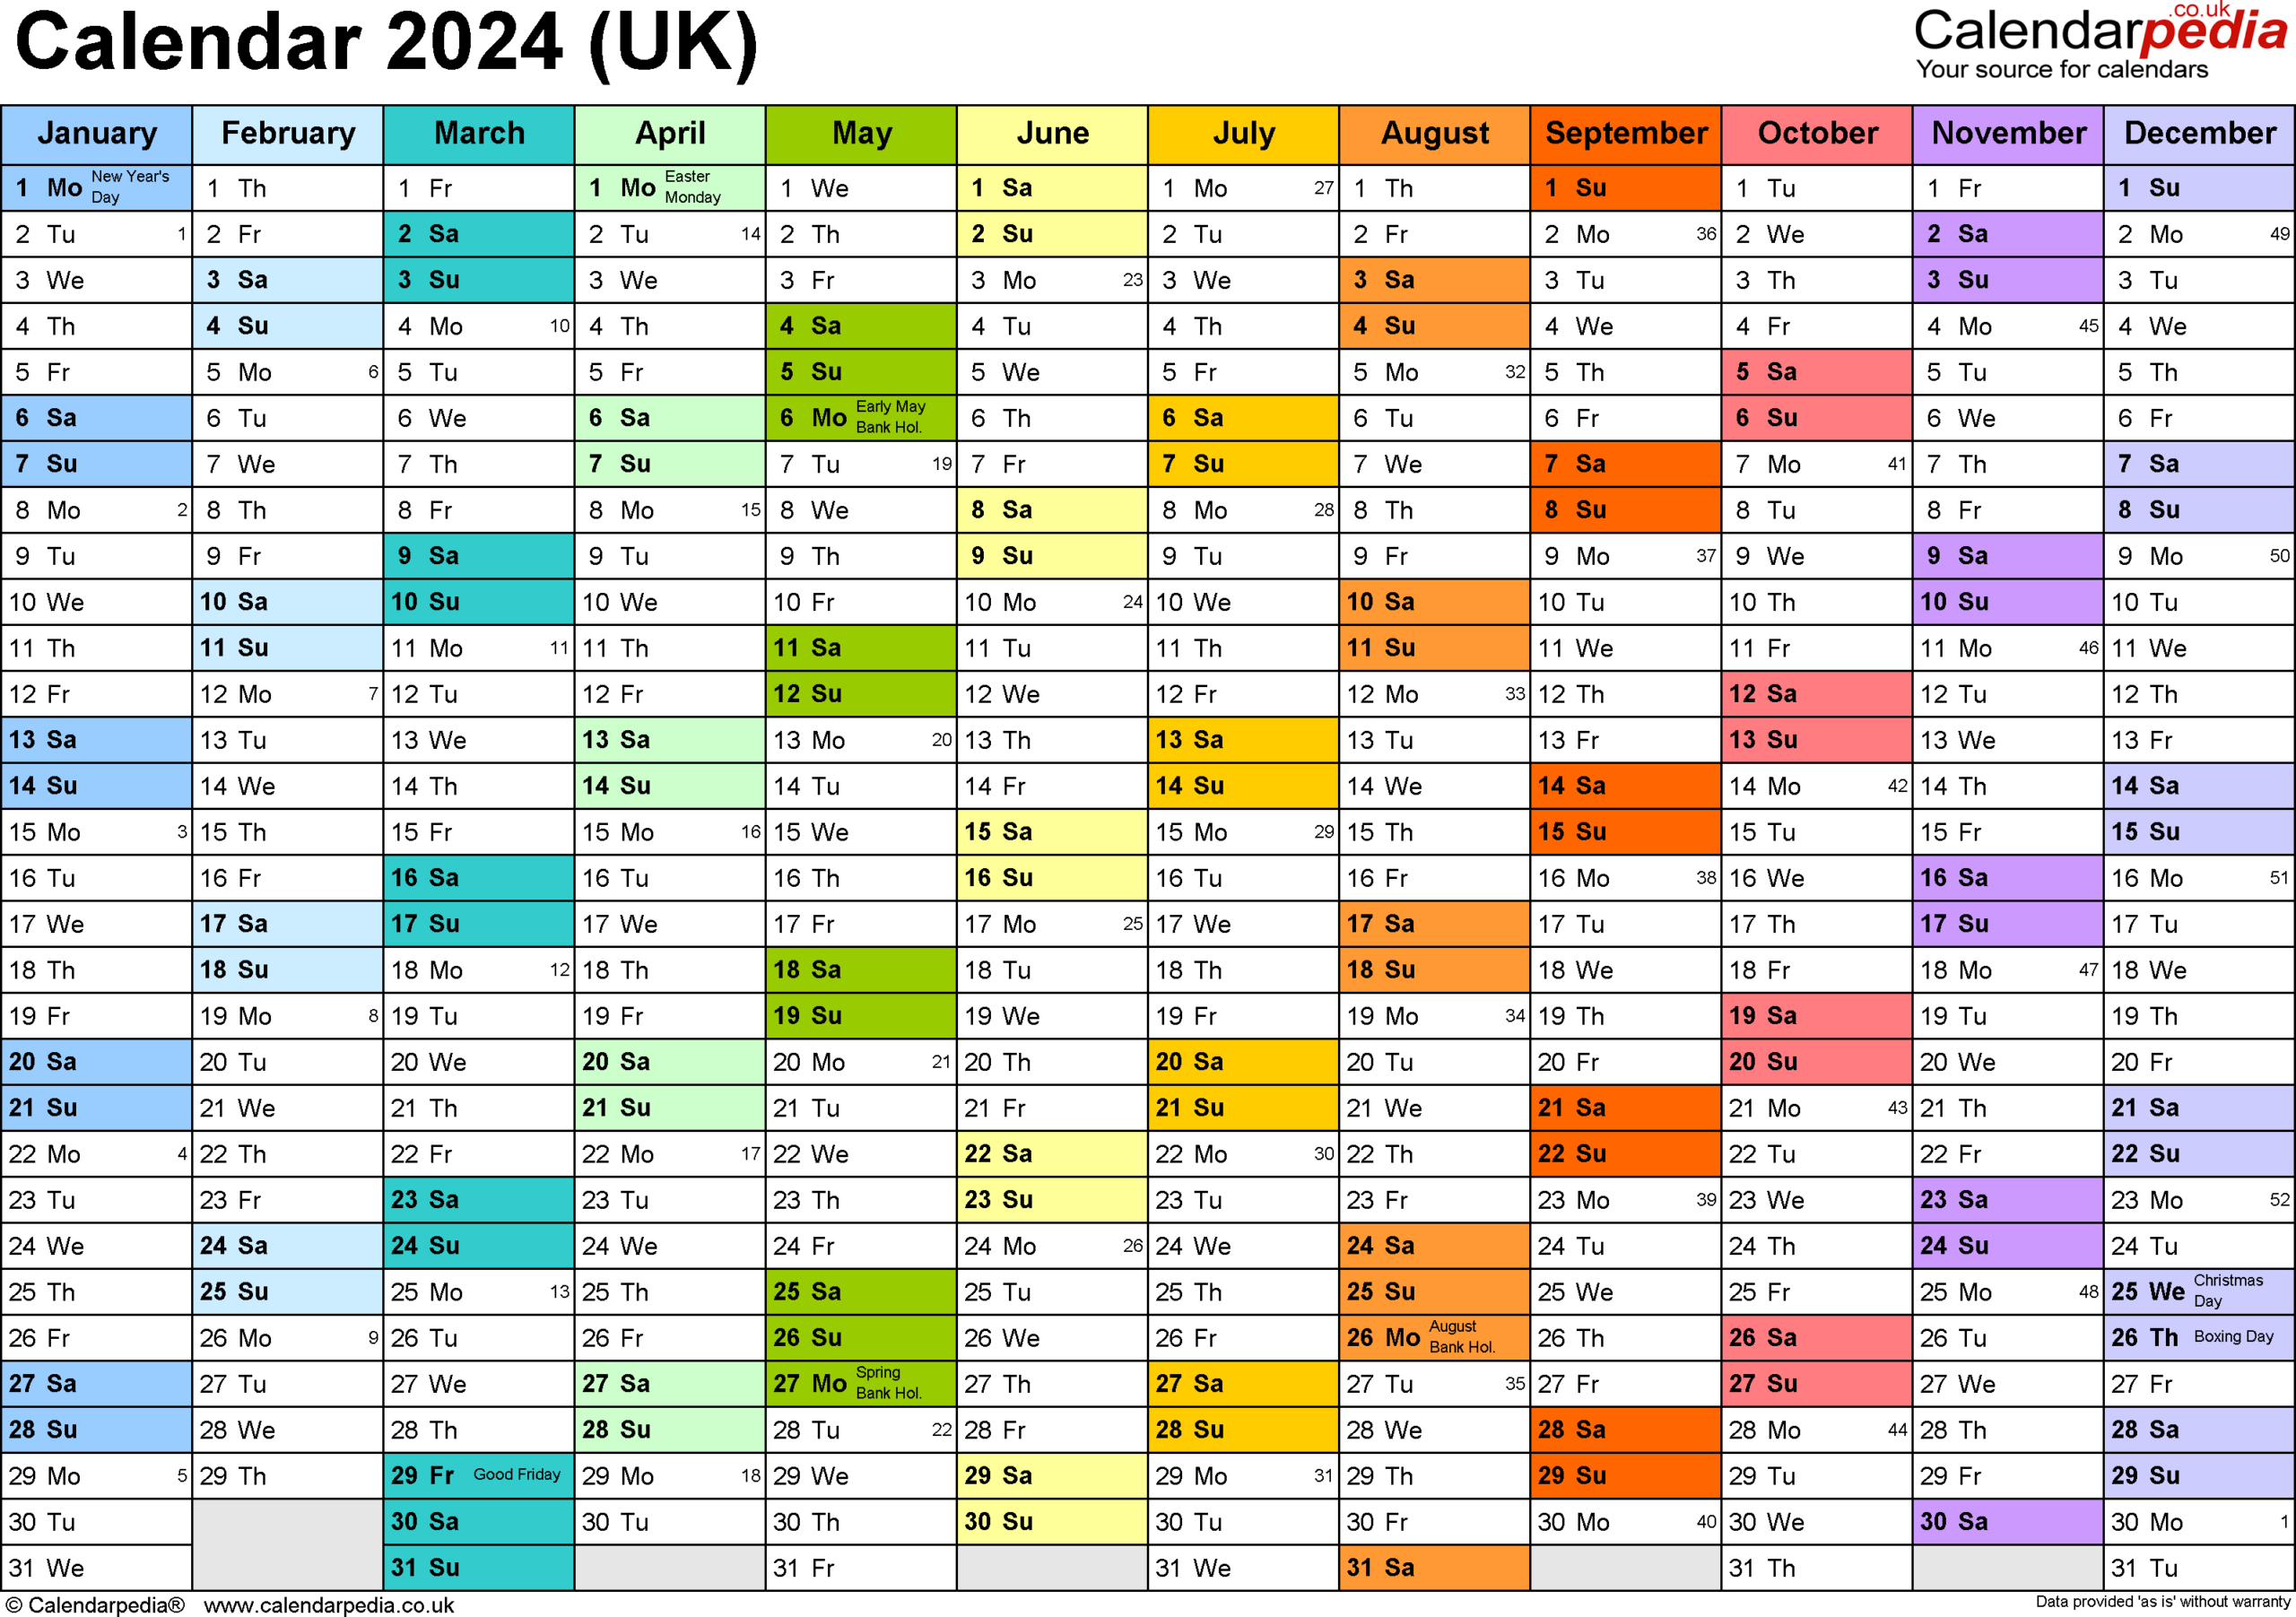 Calendar 2024 (Uk) - Free Printable Microsoft Excel Templates | How Many Days In 2024 Calendar Year?